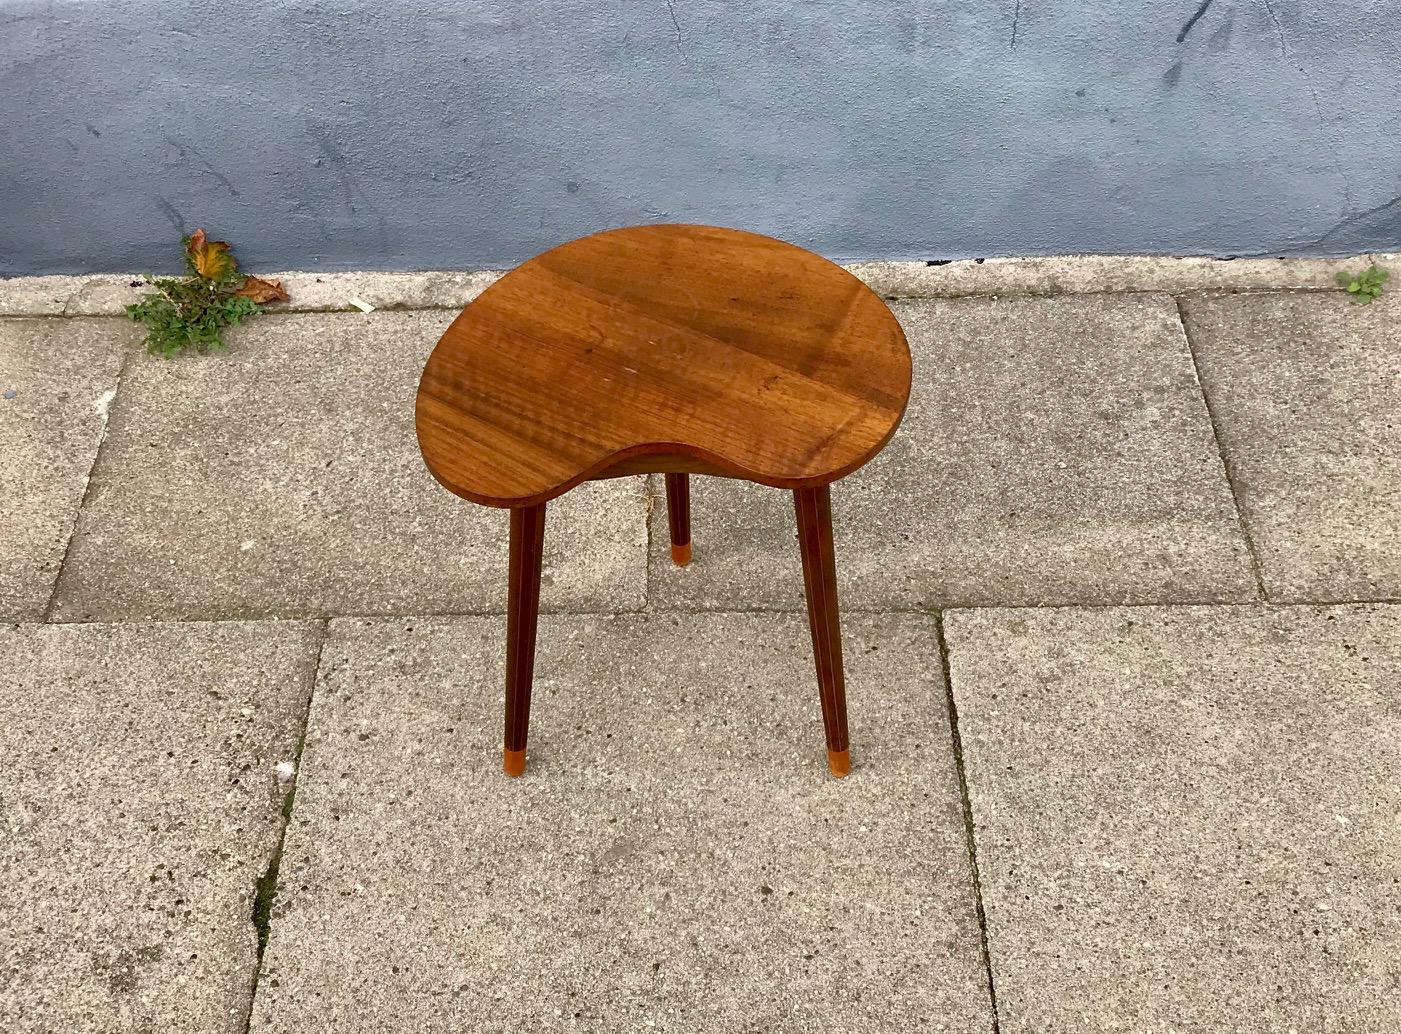 This early three-legged kidney or bean shaped side table was designed by Edmund Jørgensen in Nakskov, Denmark, during the 1950s. It features cherry-inlaid pinstripes to the 3 legs. It will be shipped as a package with the legs unscrewed from the top.